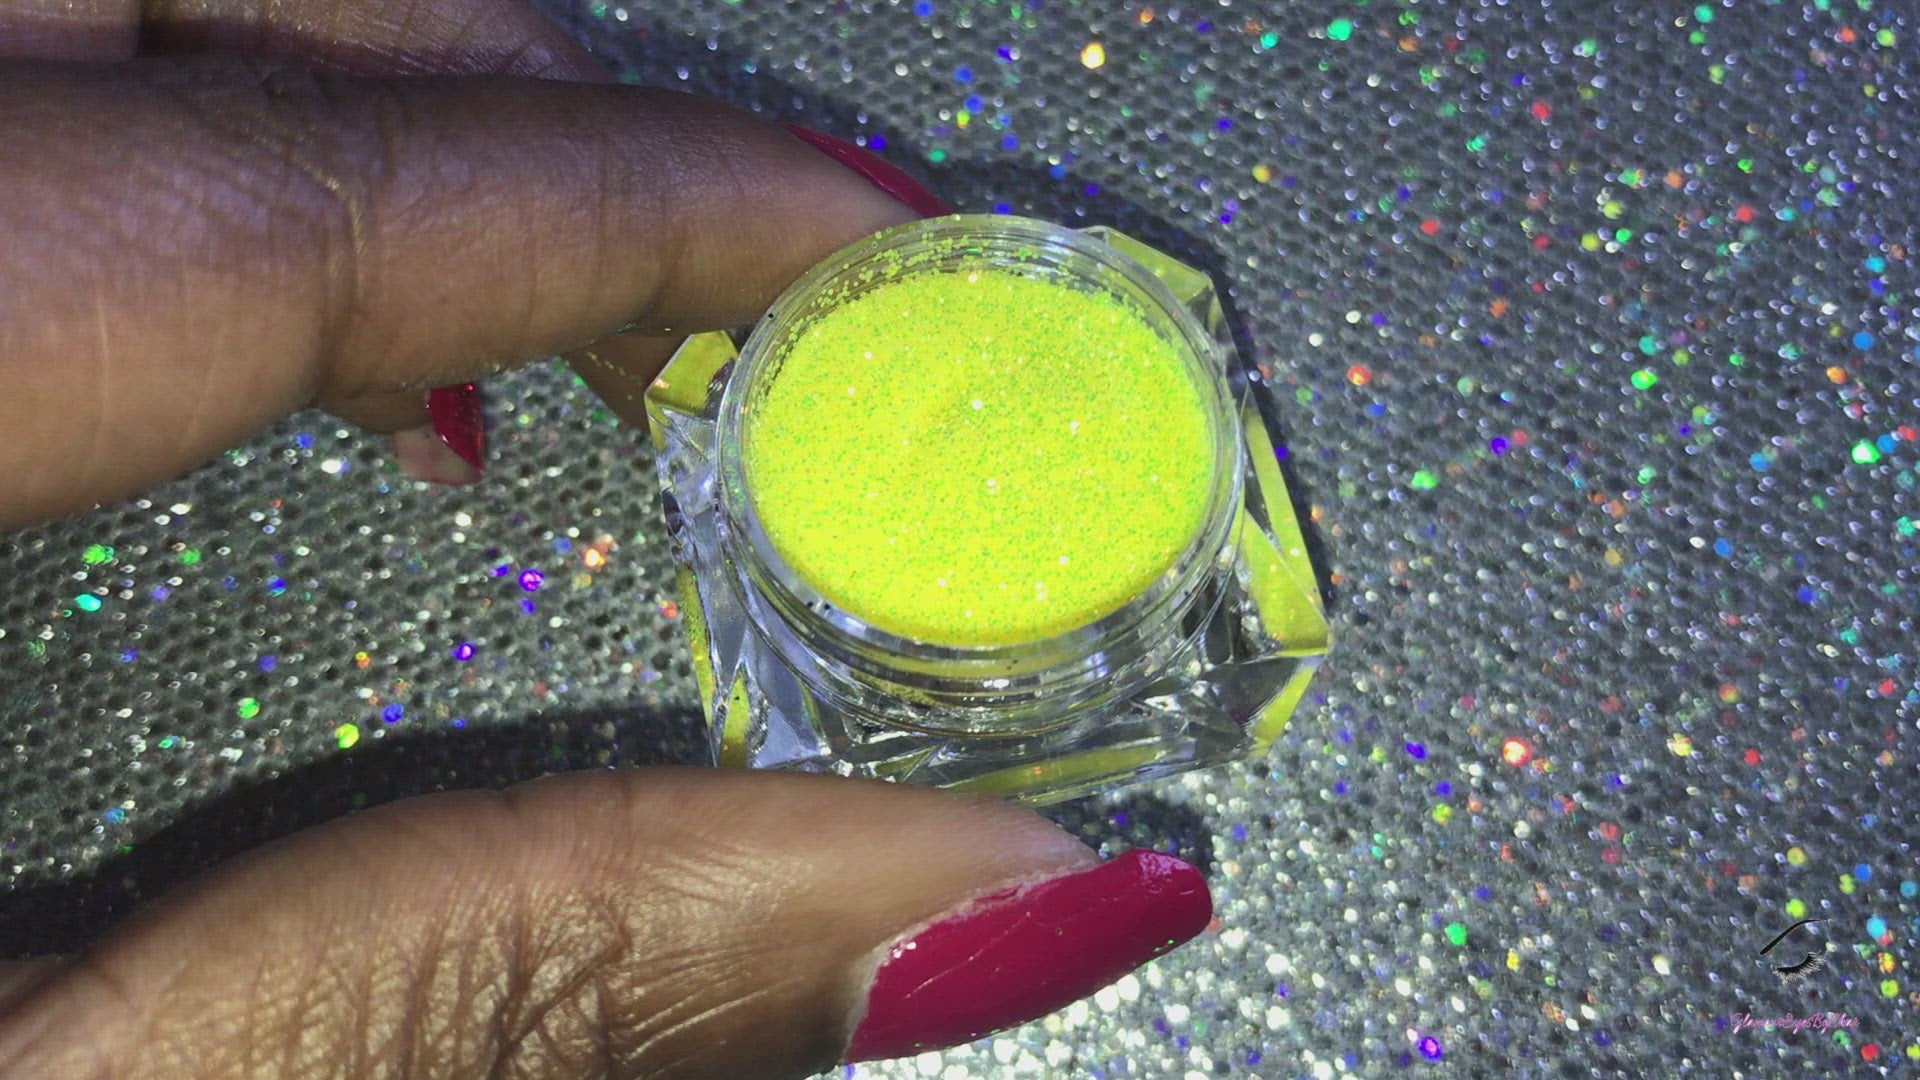 This glitter is called Caution and is part of the simple glitter collection. It consists of vibrant neon yellow iridescent glitter that reflects an orange, gold and green sparkle. Caution can be used for your face, body, hair and nails. Comes in 5g jars only.